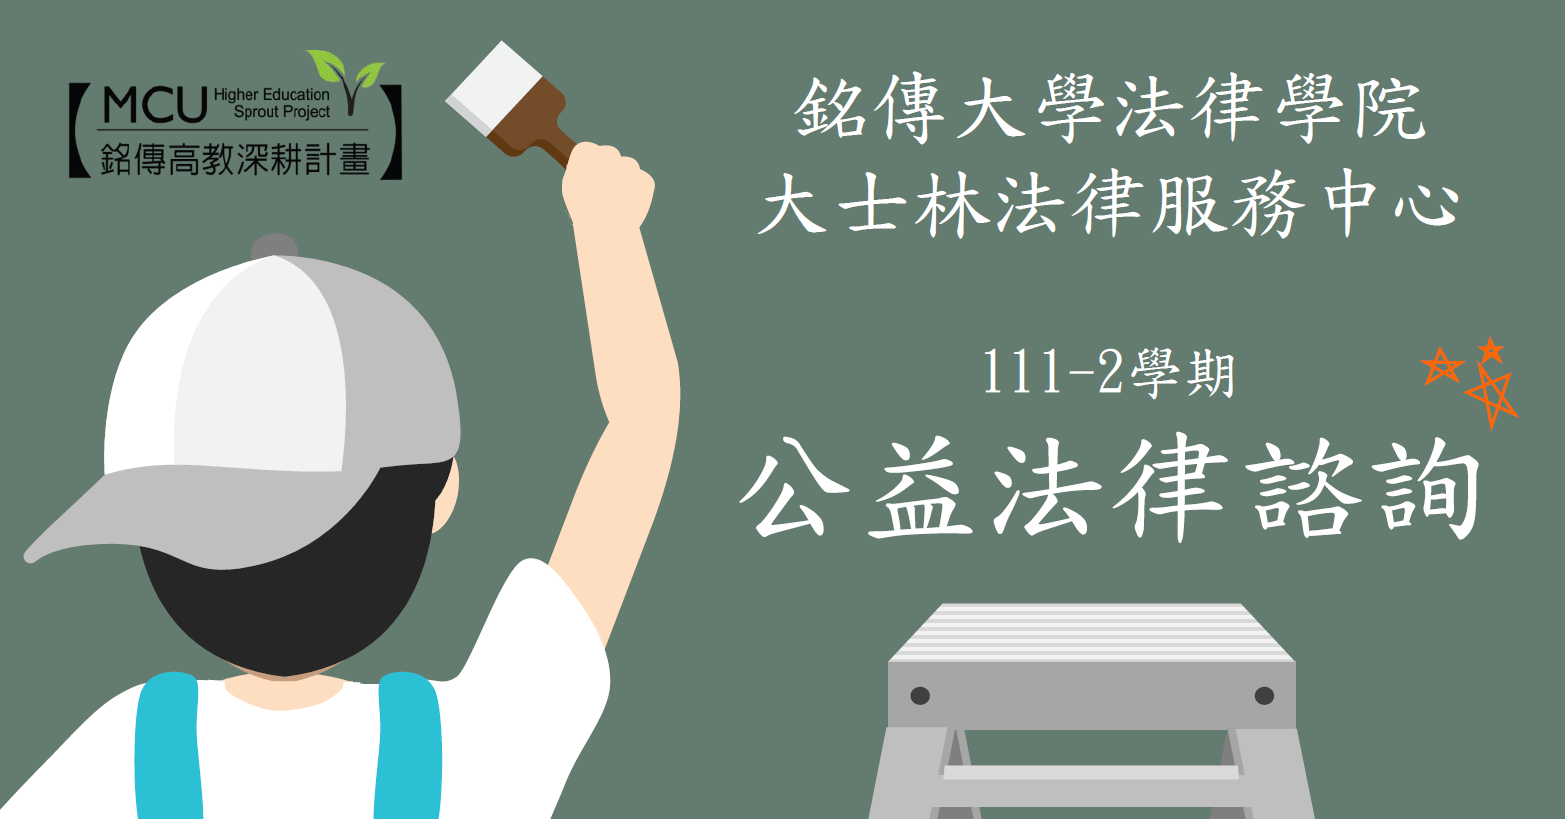 Featured image for “School of Law- Announcement of Legal Service Center in Greater Shilin Area”